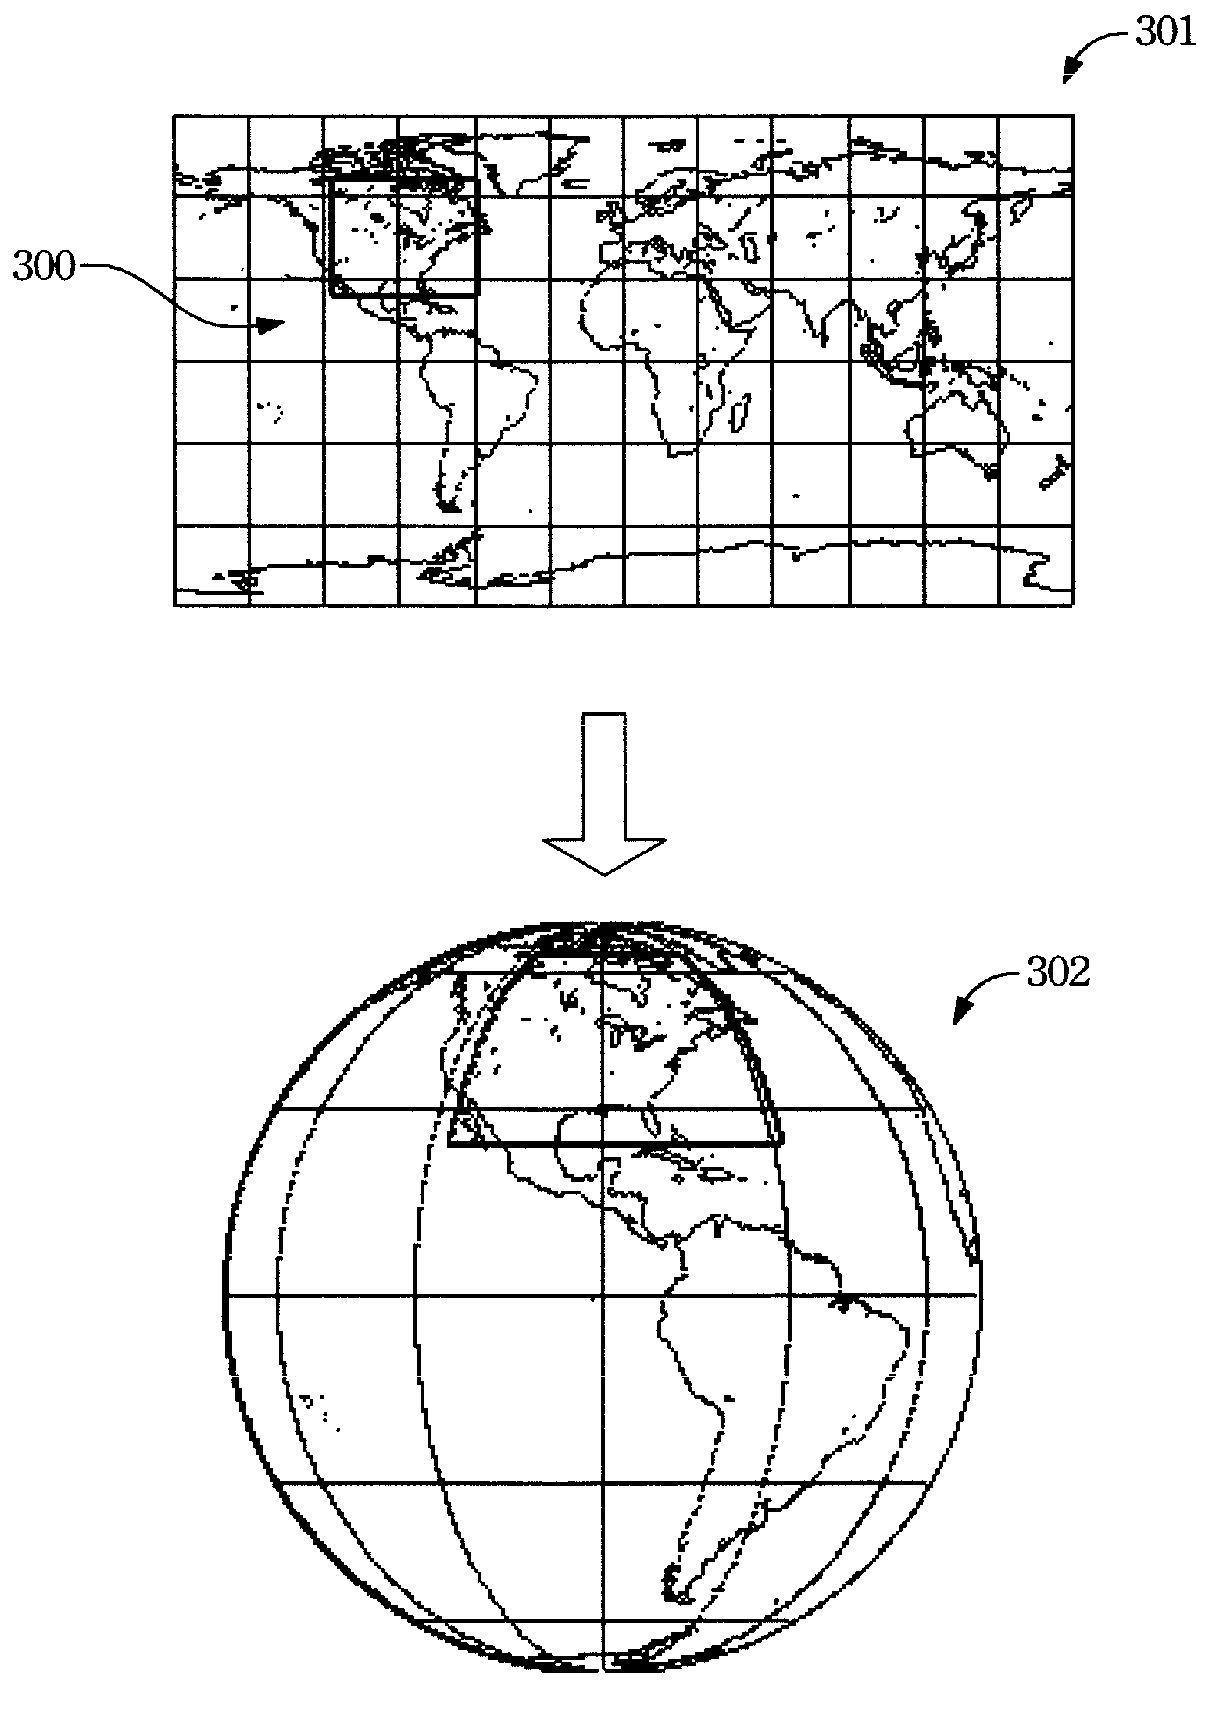 Method for providing output image in either cylindrical mode or perspective mode